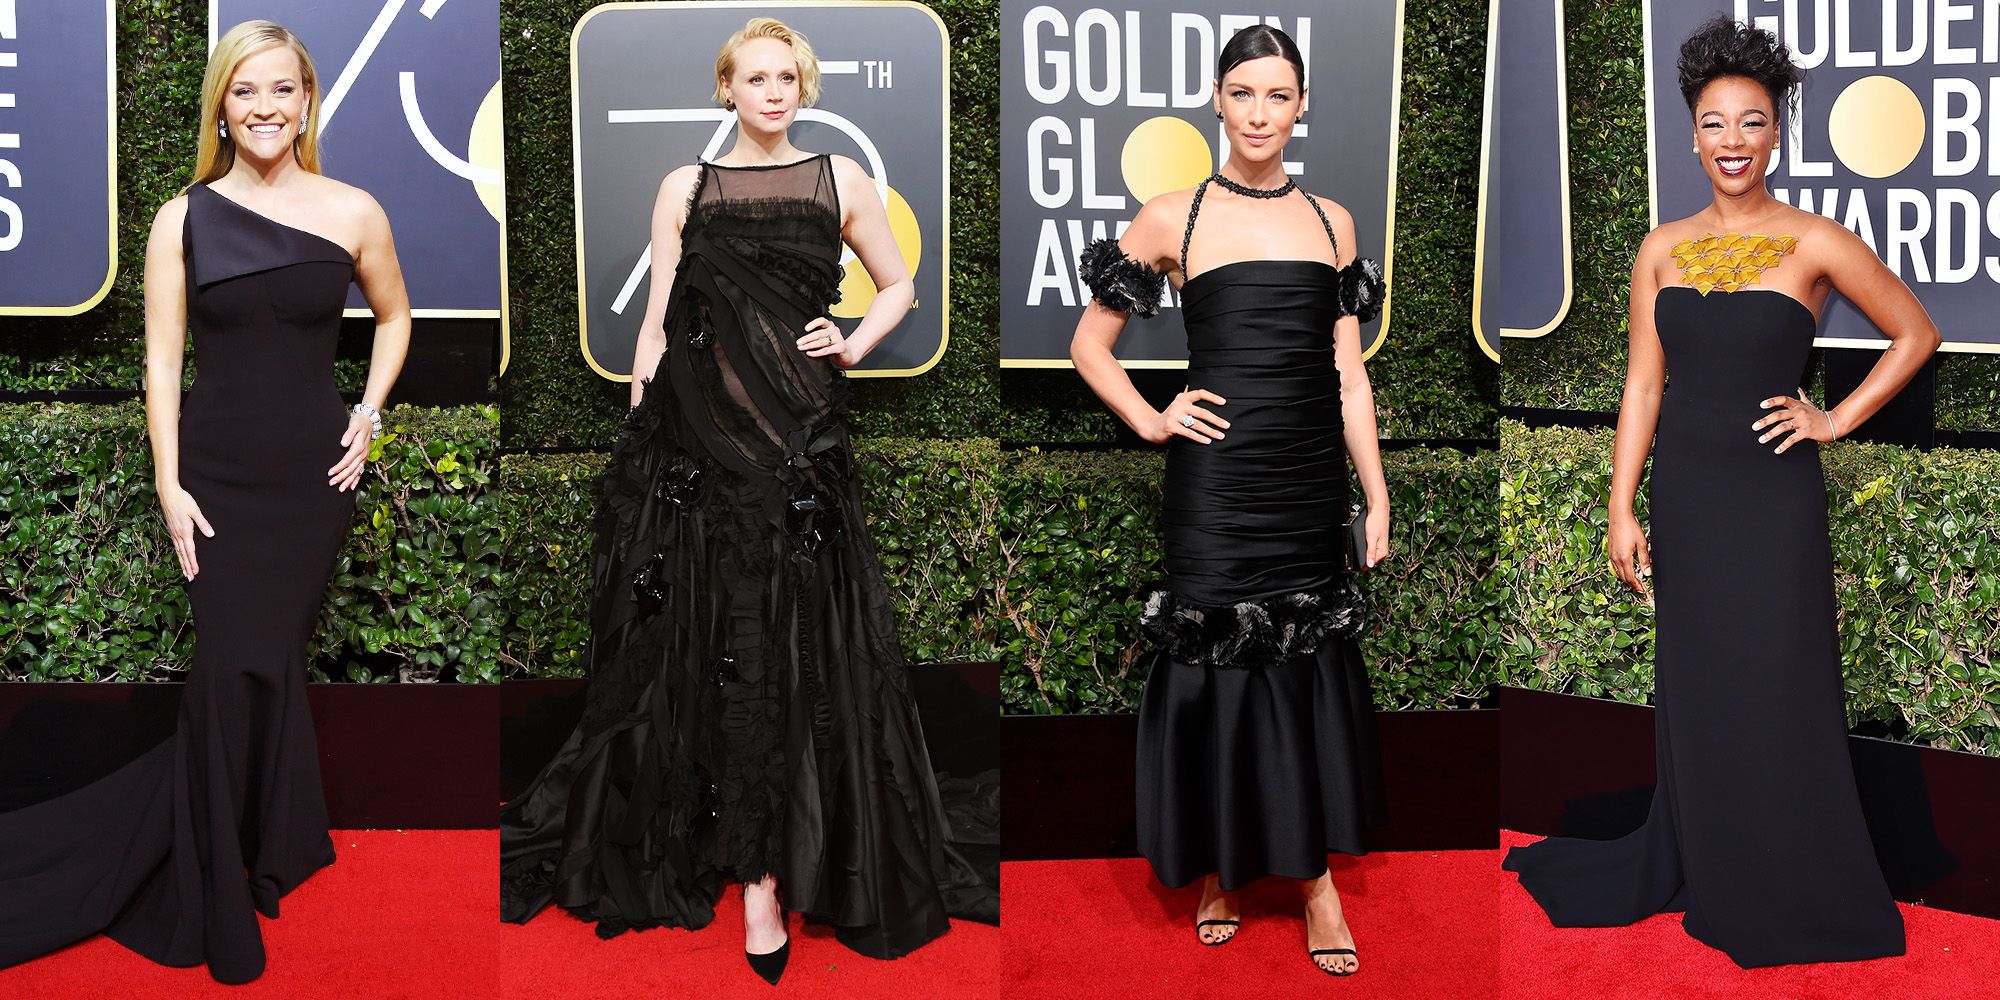 13 Celebrities Explain Why They Wore Black on the Golden Globes